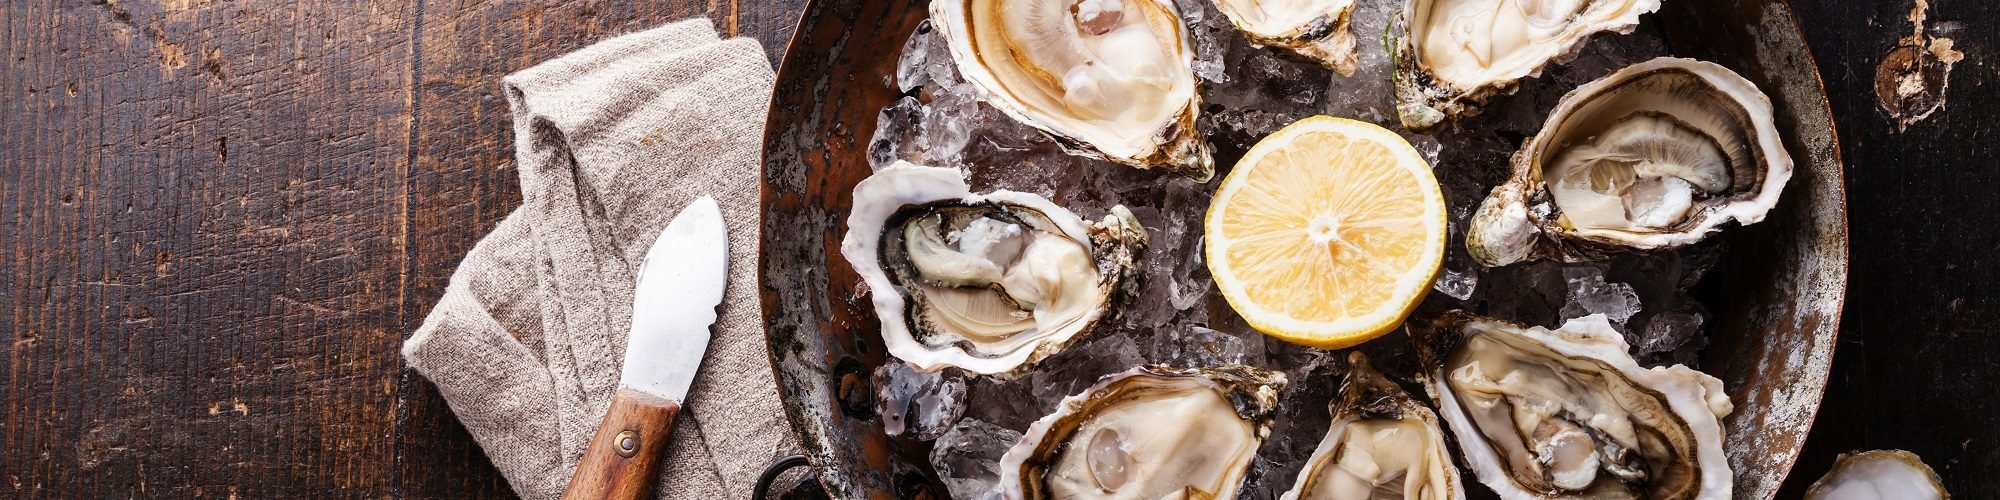 oysters on the half shell on a bed of ice for national oyster day